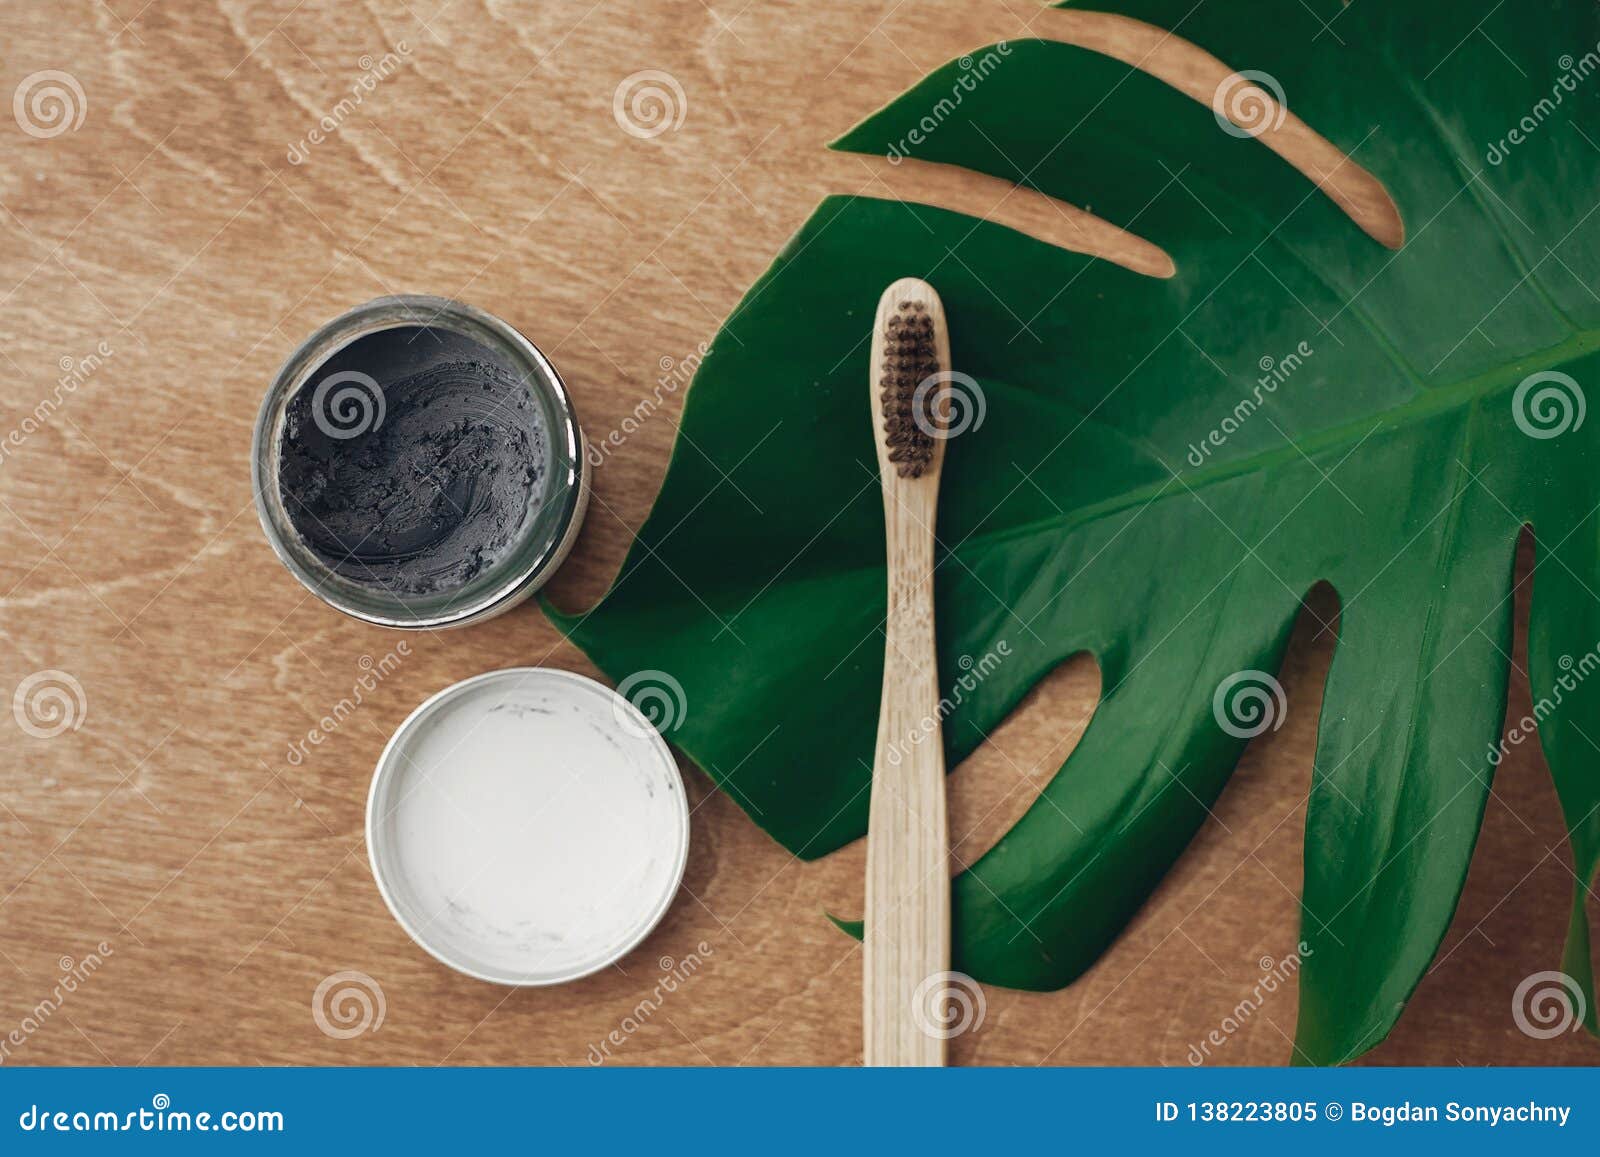 natural toothpaste activated charcoal and bamboo toothbrush on wooden background with green monstera leaf. plastic free beauty